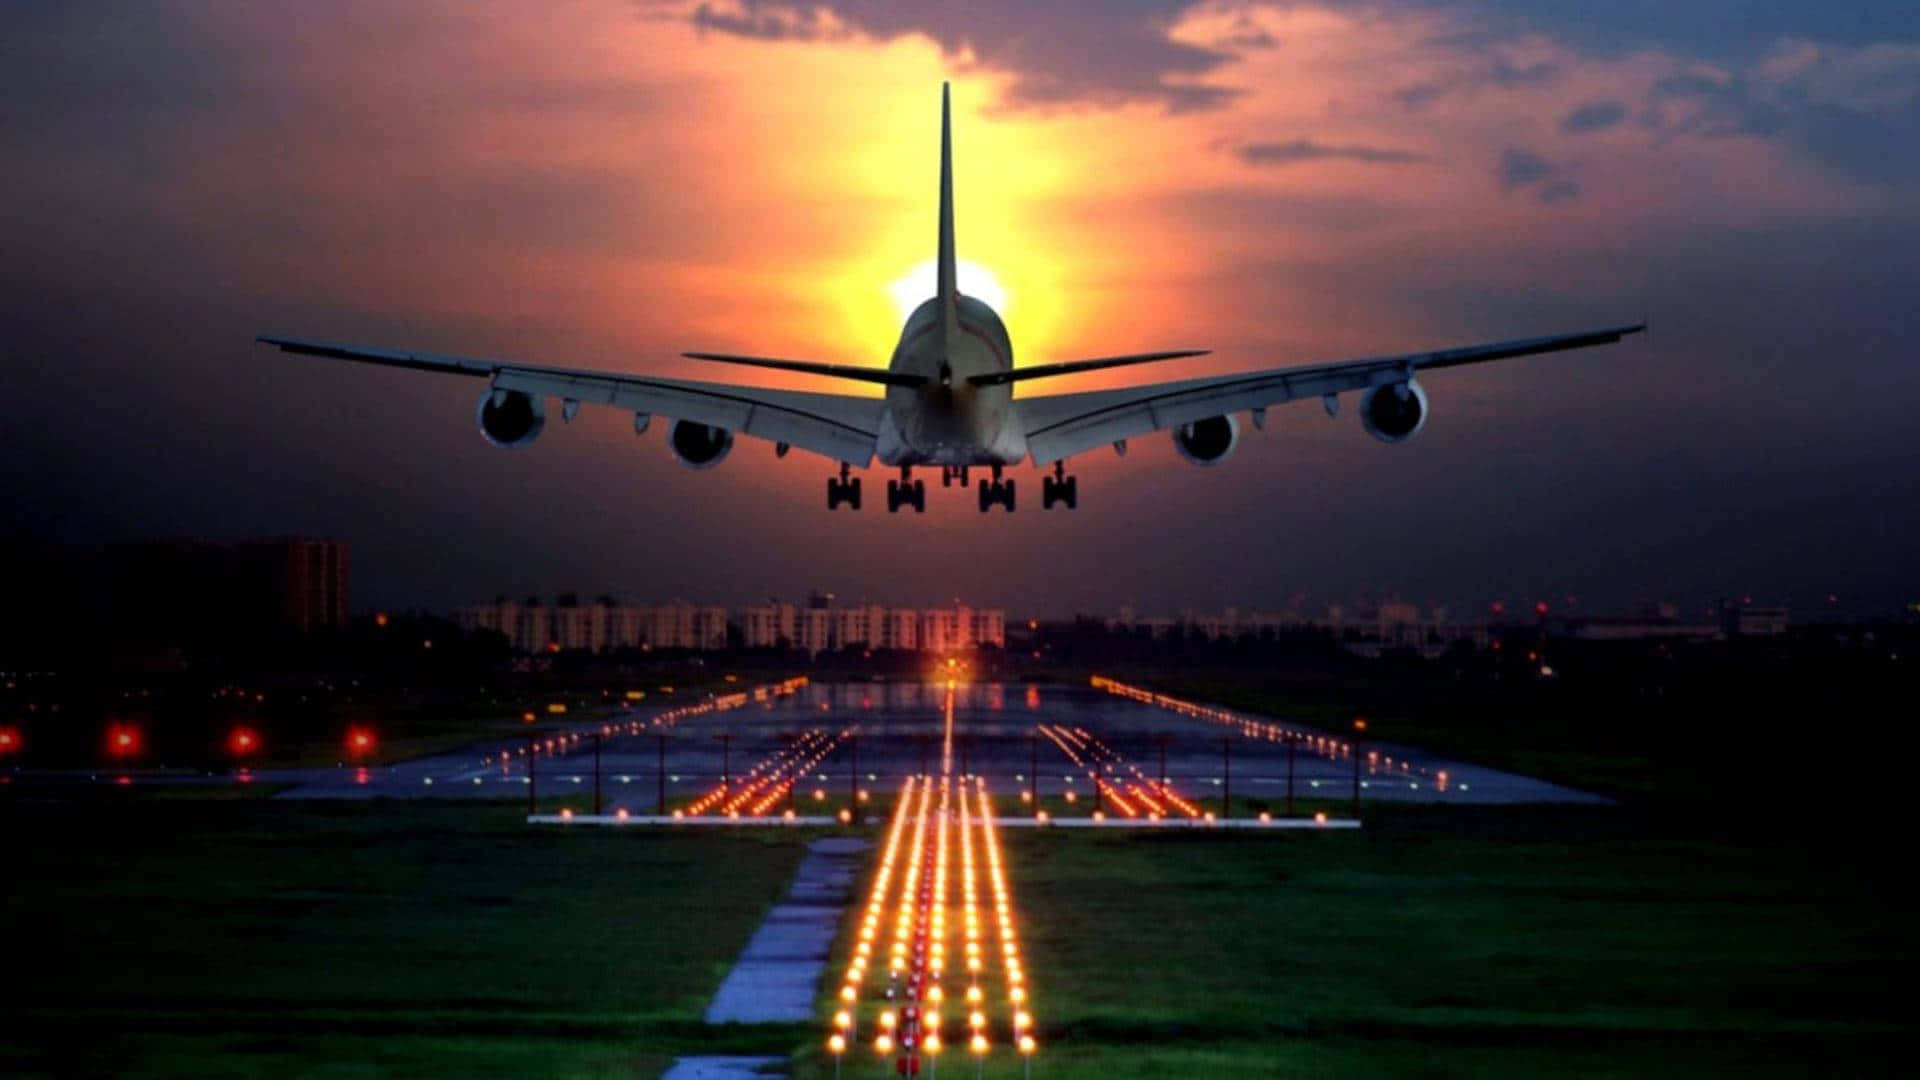 Dark And Cloudy Sunset Airplane Departure Wallpaper